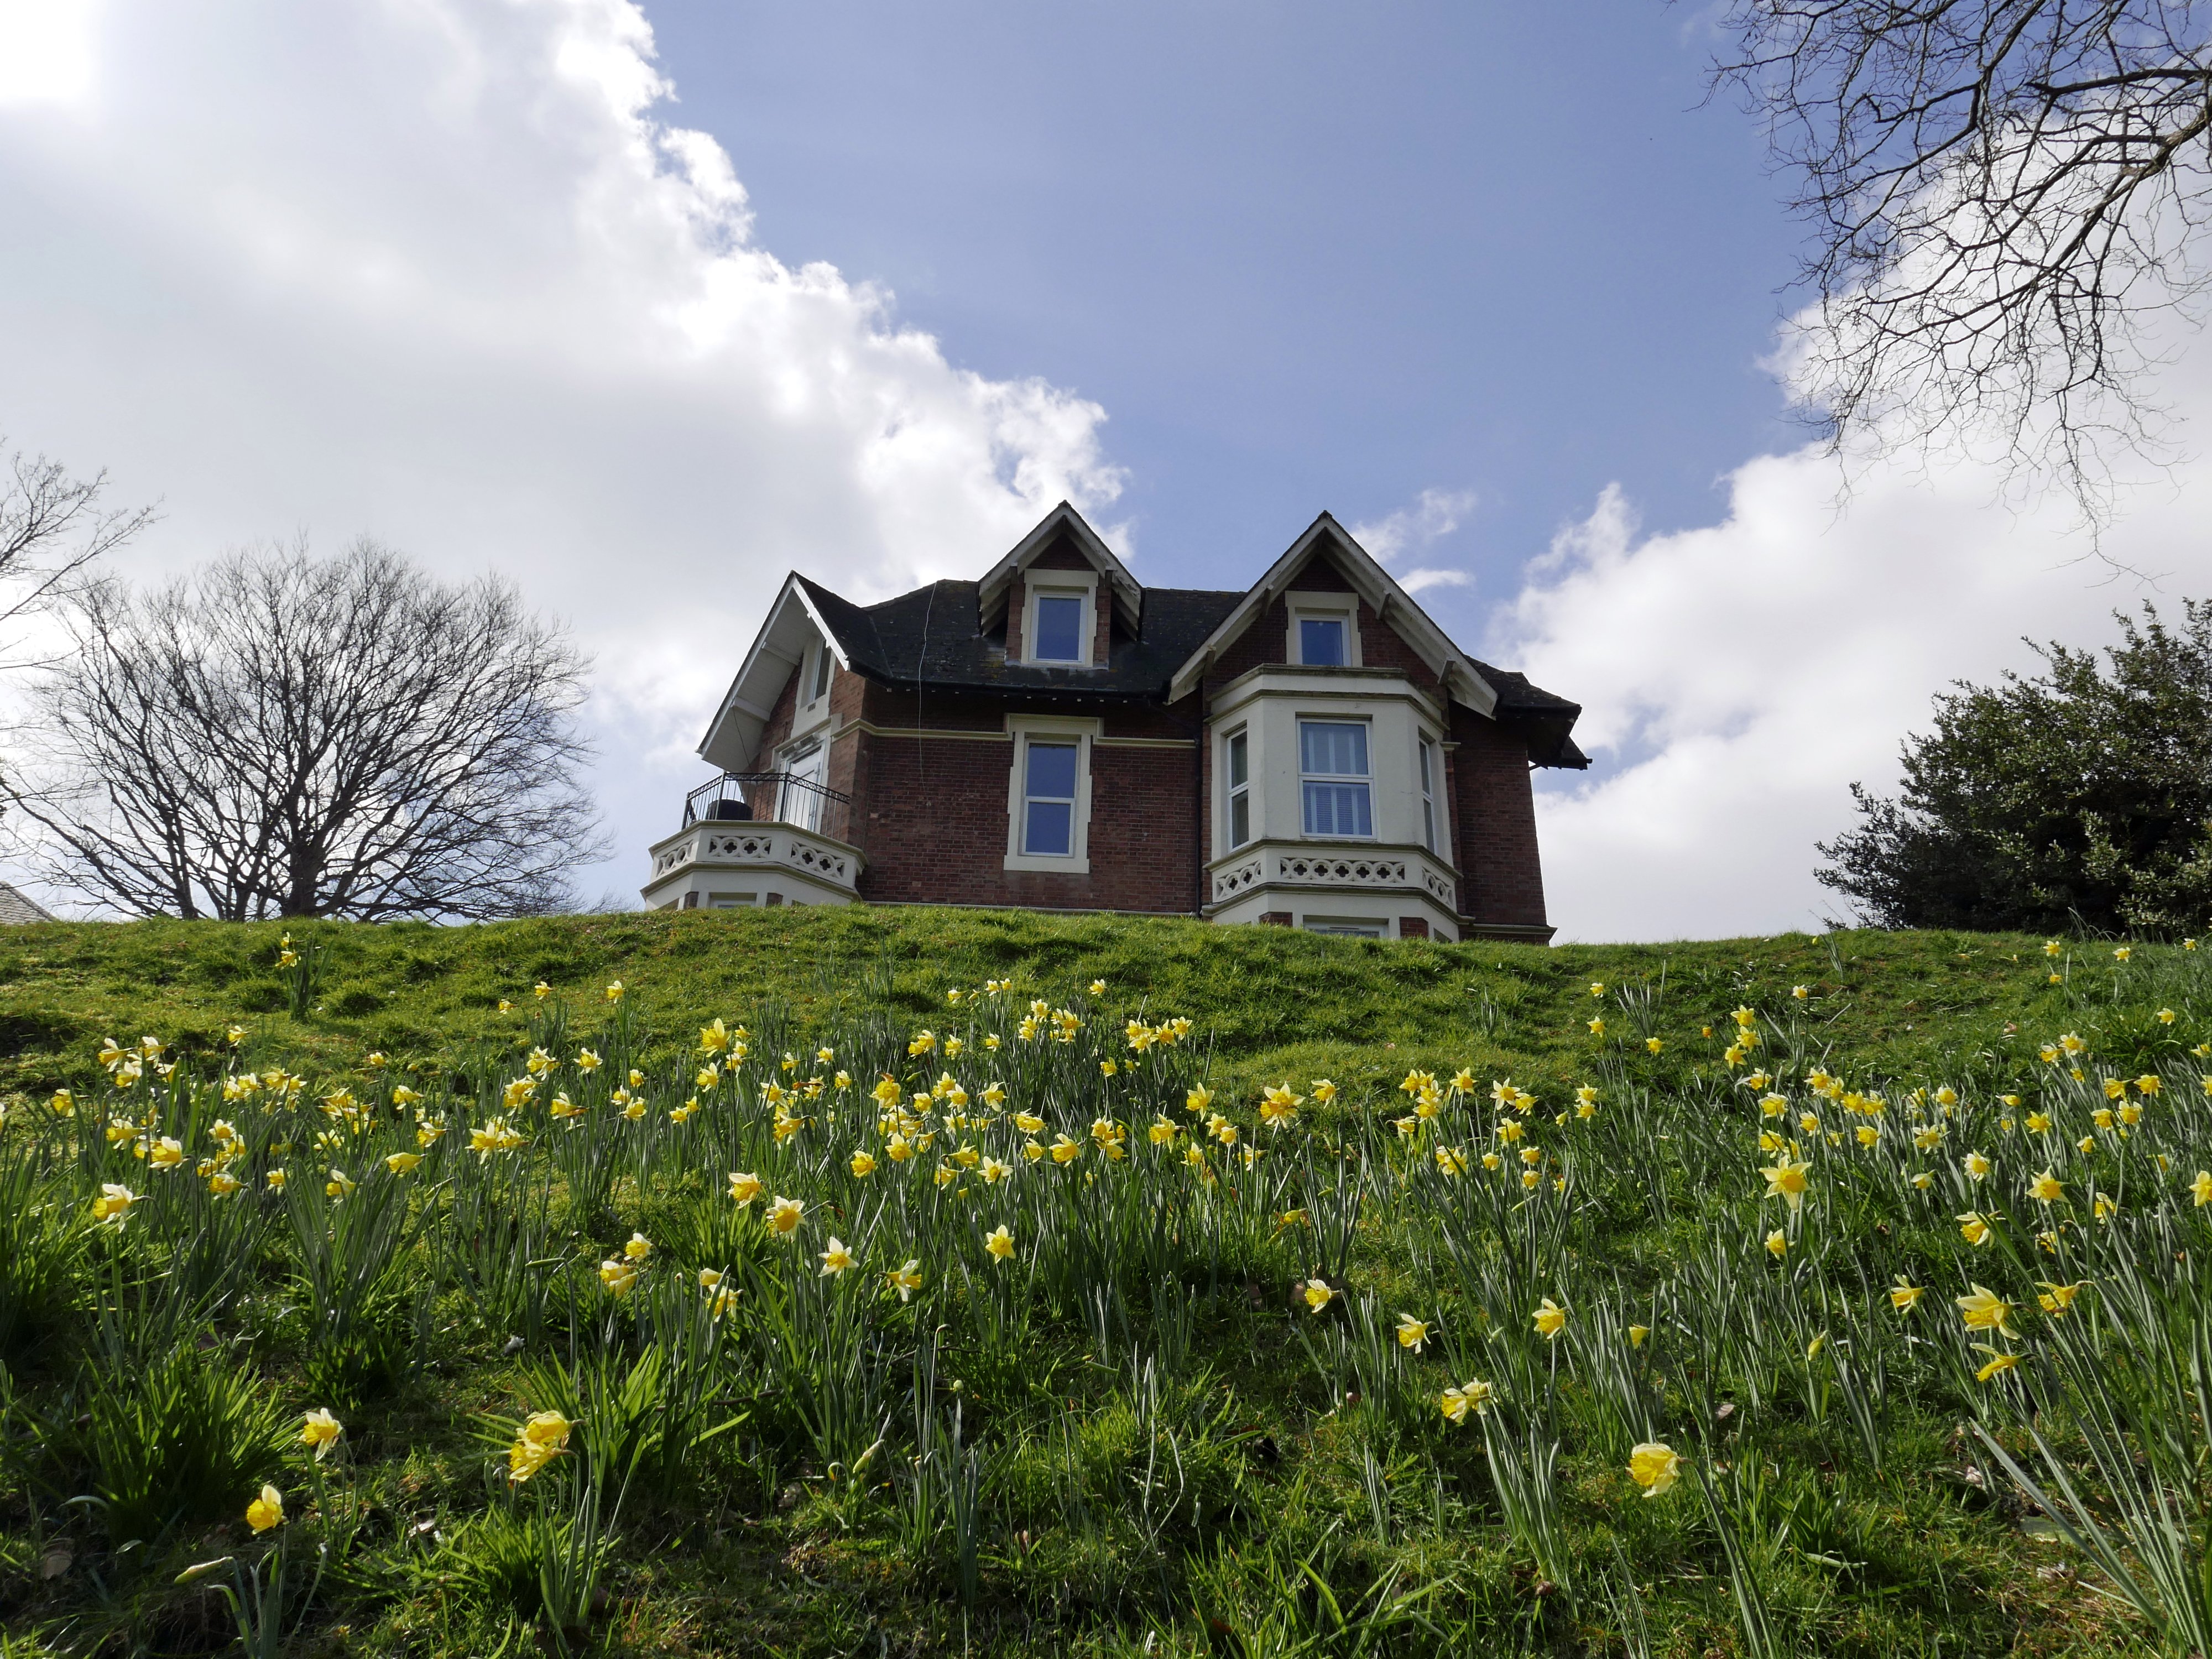 houses, Daffodils, Grass, Nature Wallpaper